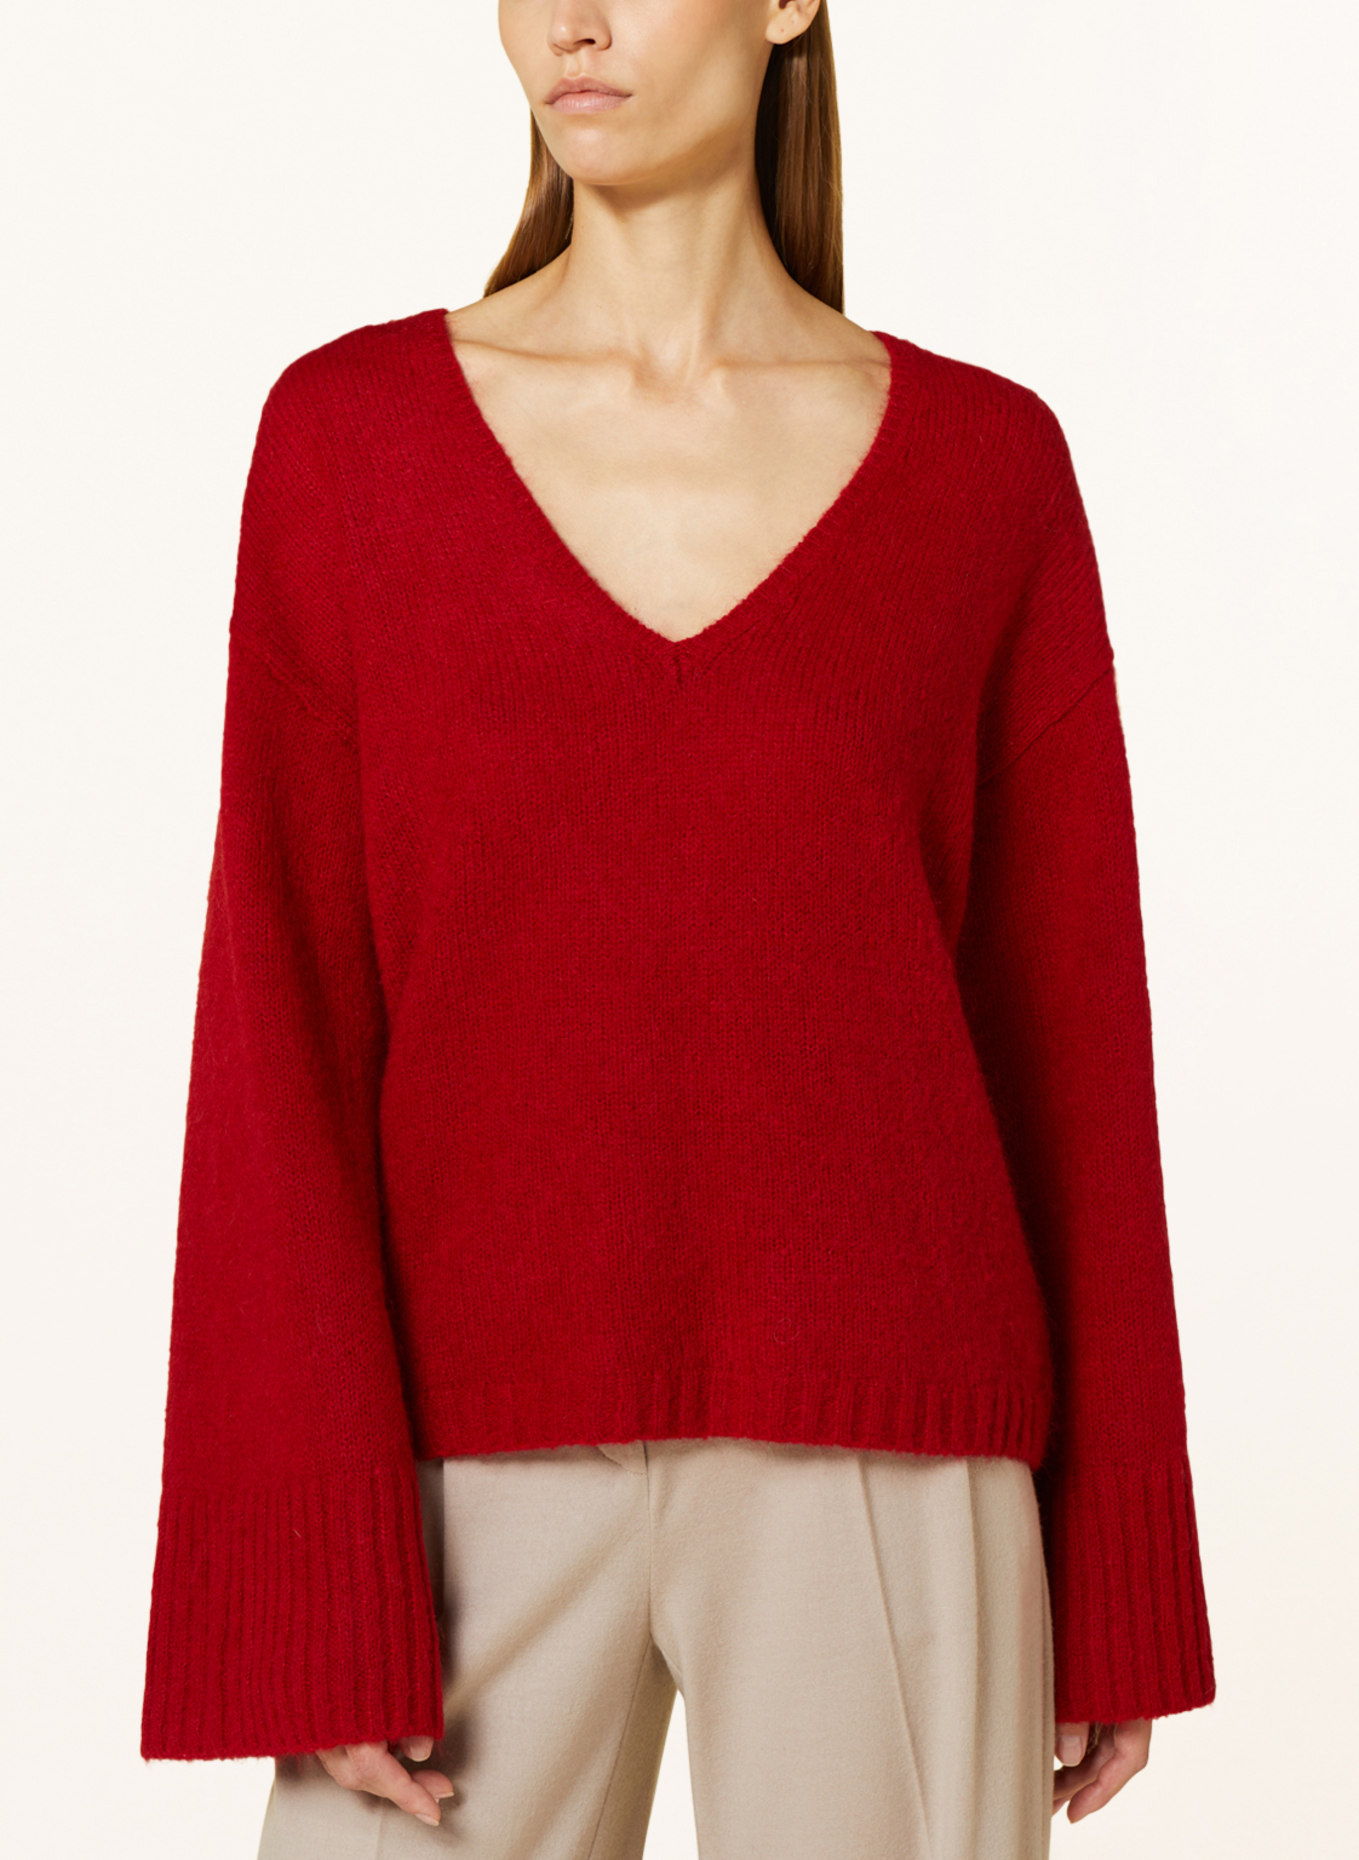 BY MALENE BIRGER Sweater CIMONE with mohair, Color: RED (Image 4)